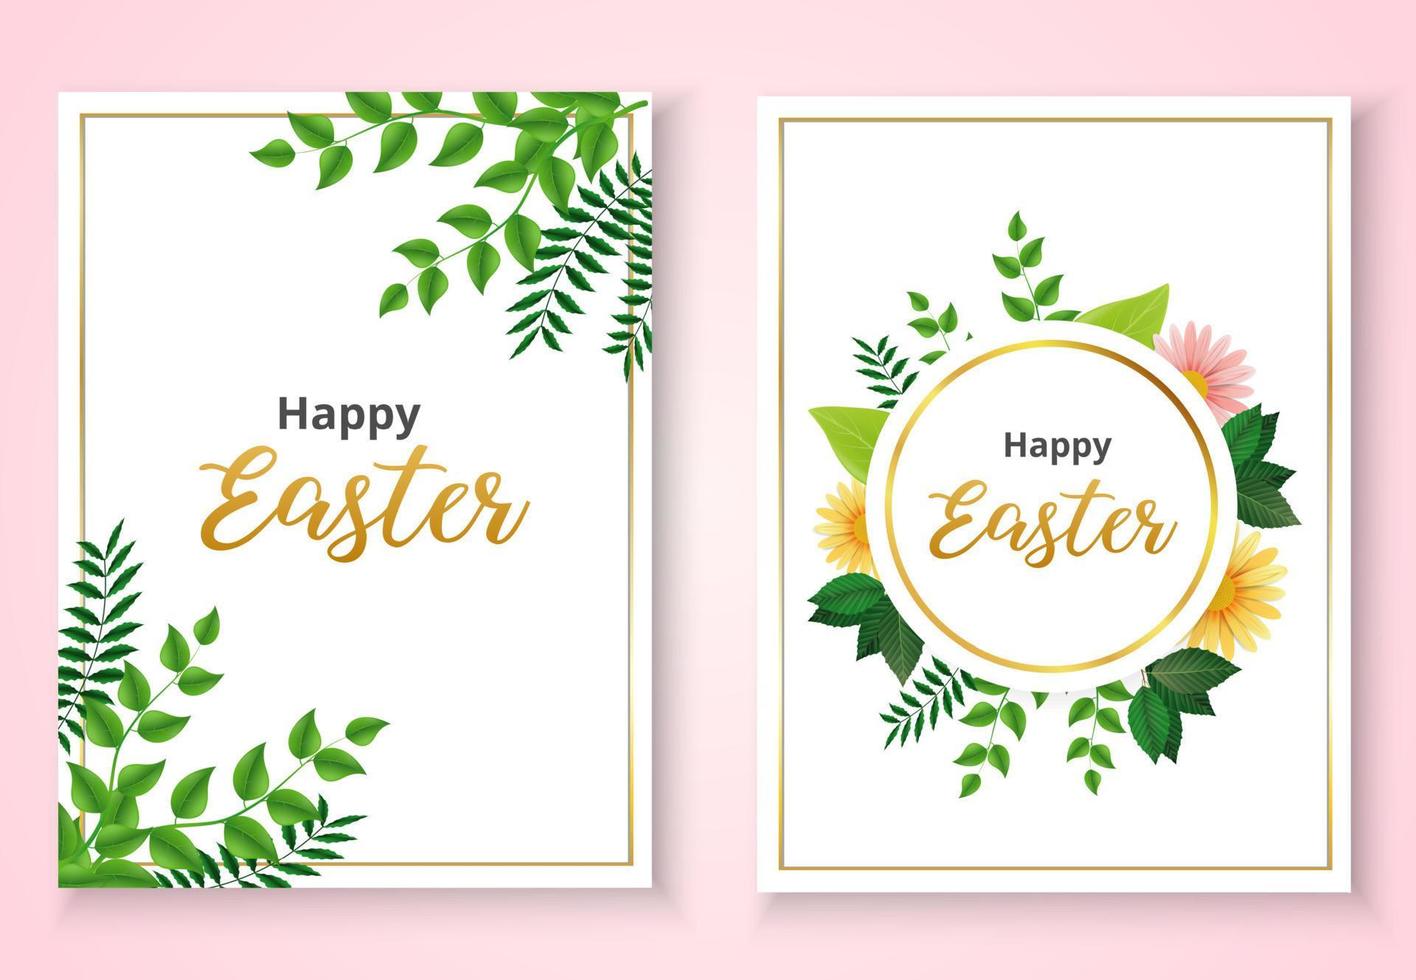 Happy Easter invitation card template with flowers and green leaves vector